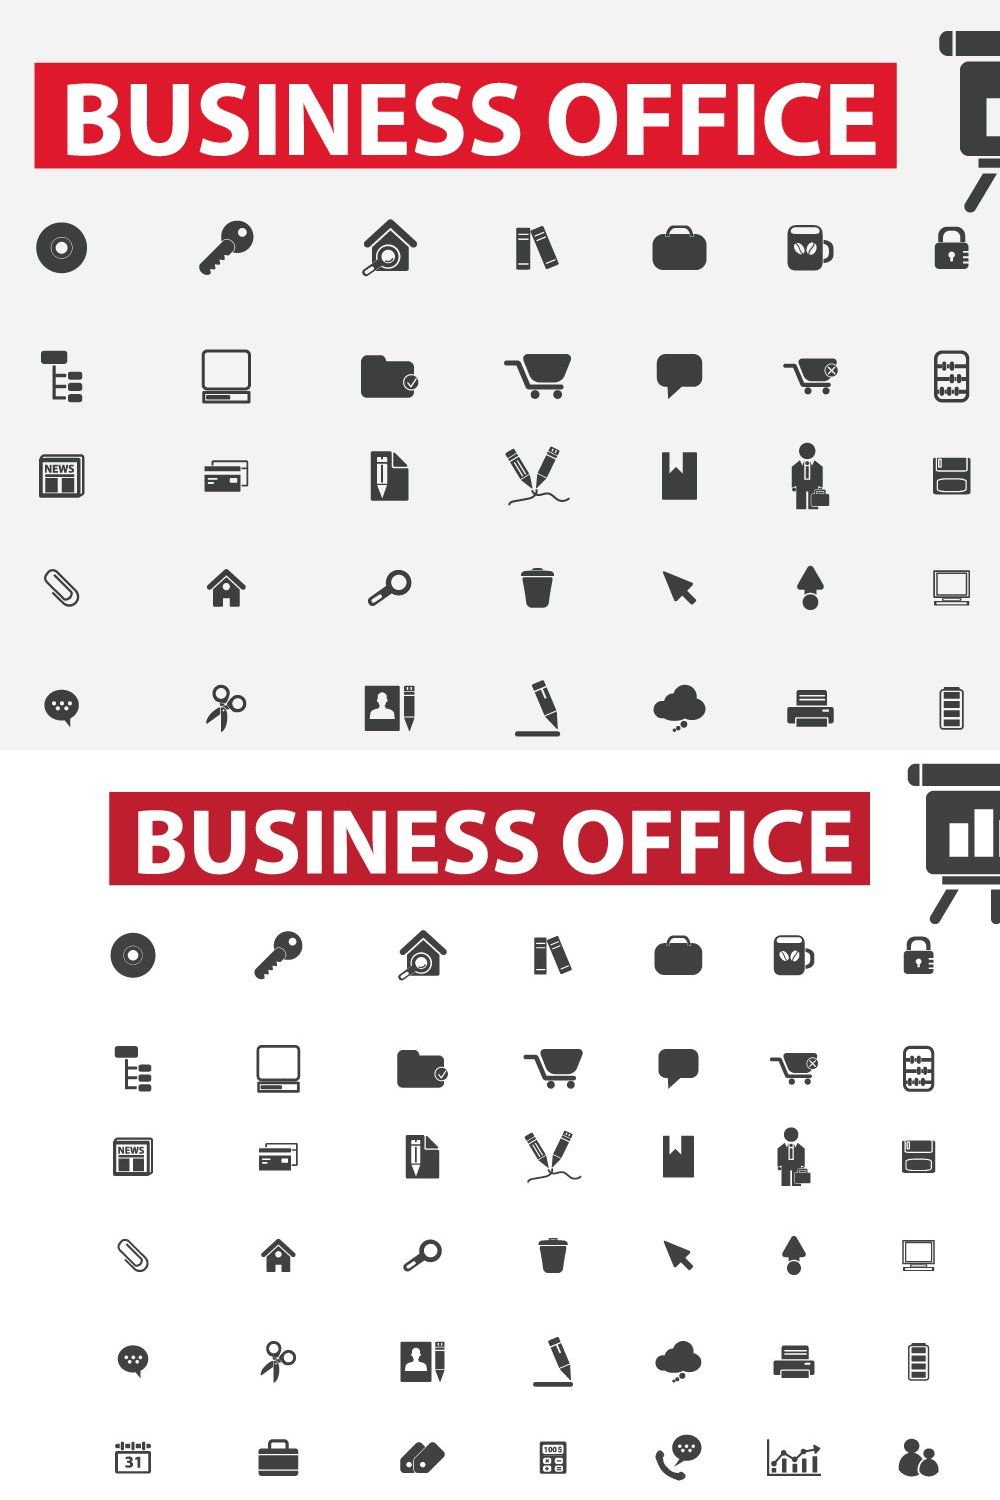 80 Business office icons pinterest preview image.